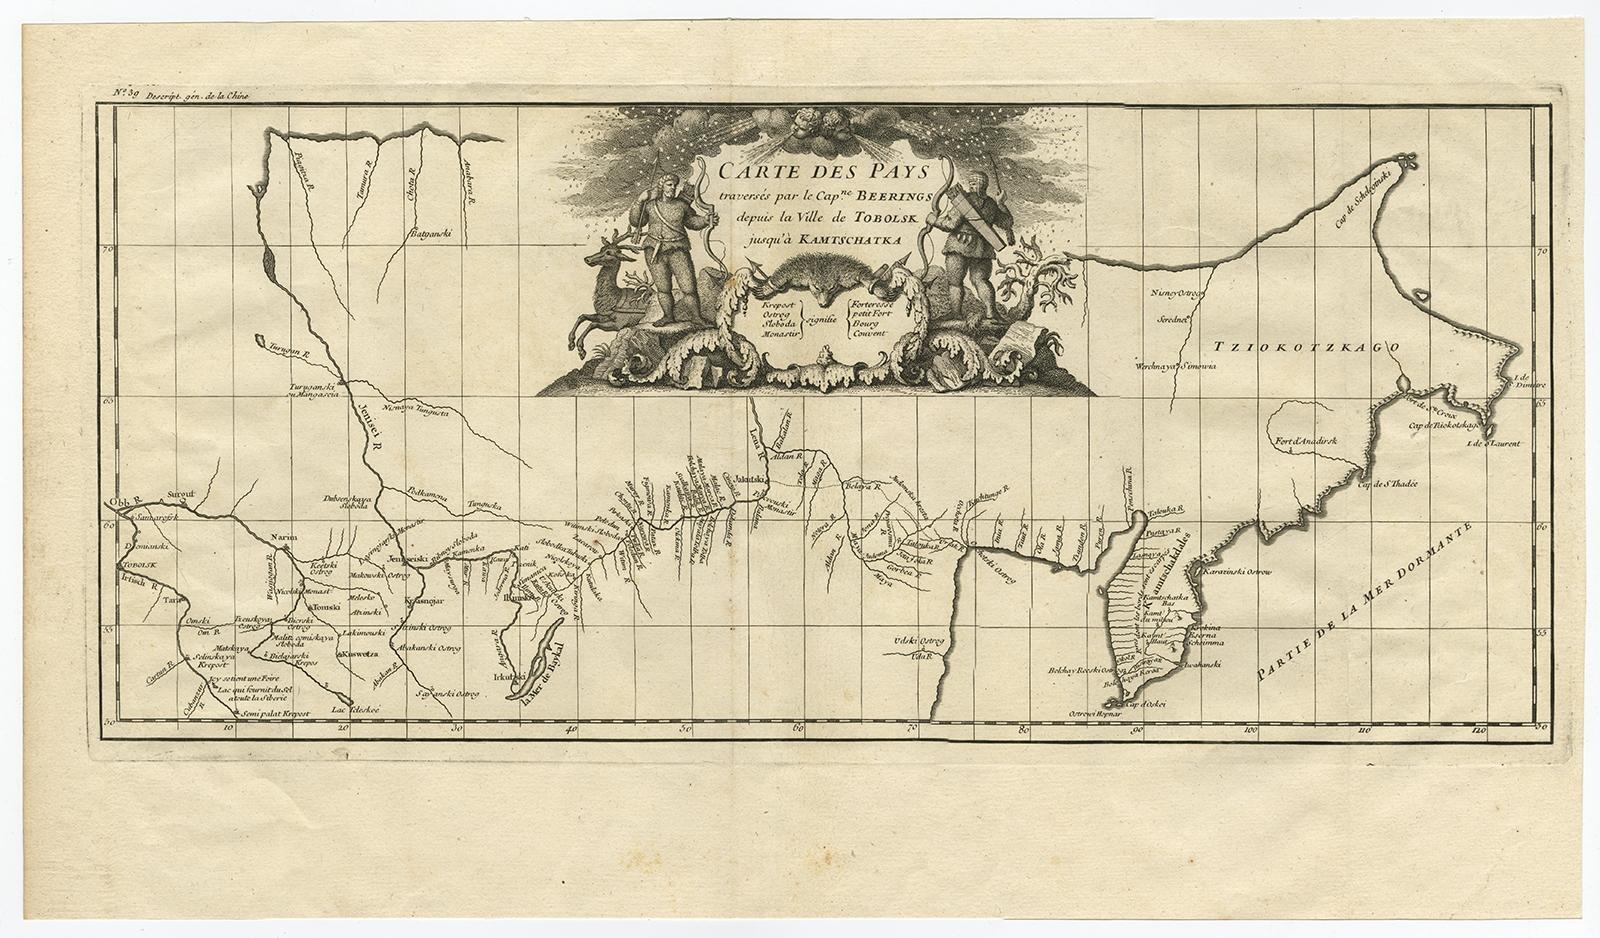 Antique map titled 'Carte Des Pays traverses par le Capne. Beerings depuis la Ville de Tobolsk jusqua'a Kamtschatka'. 

This is the first printed map to illustrate Vitus Bering's first voyage, representing the first broadly accurate cartography of